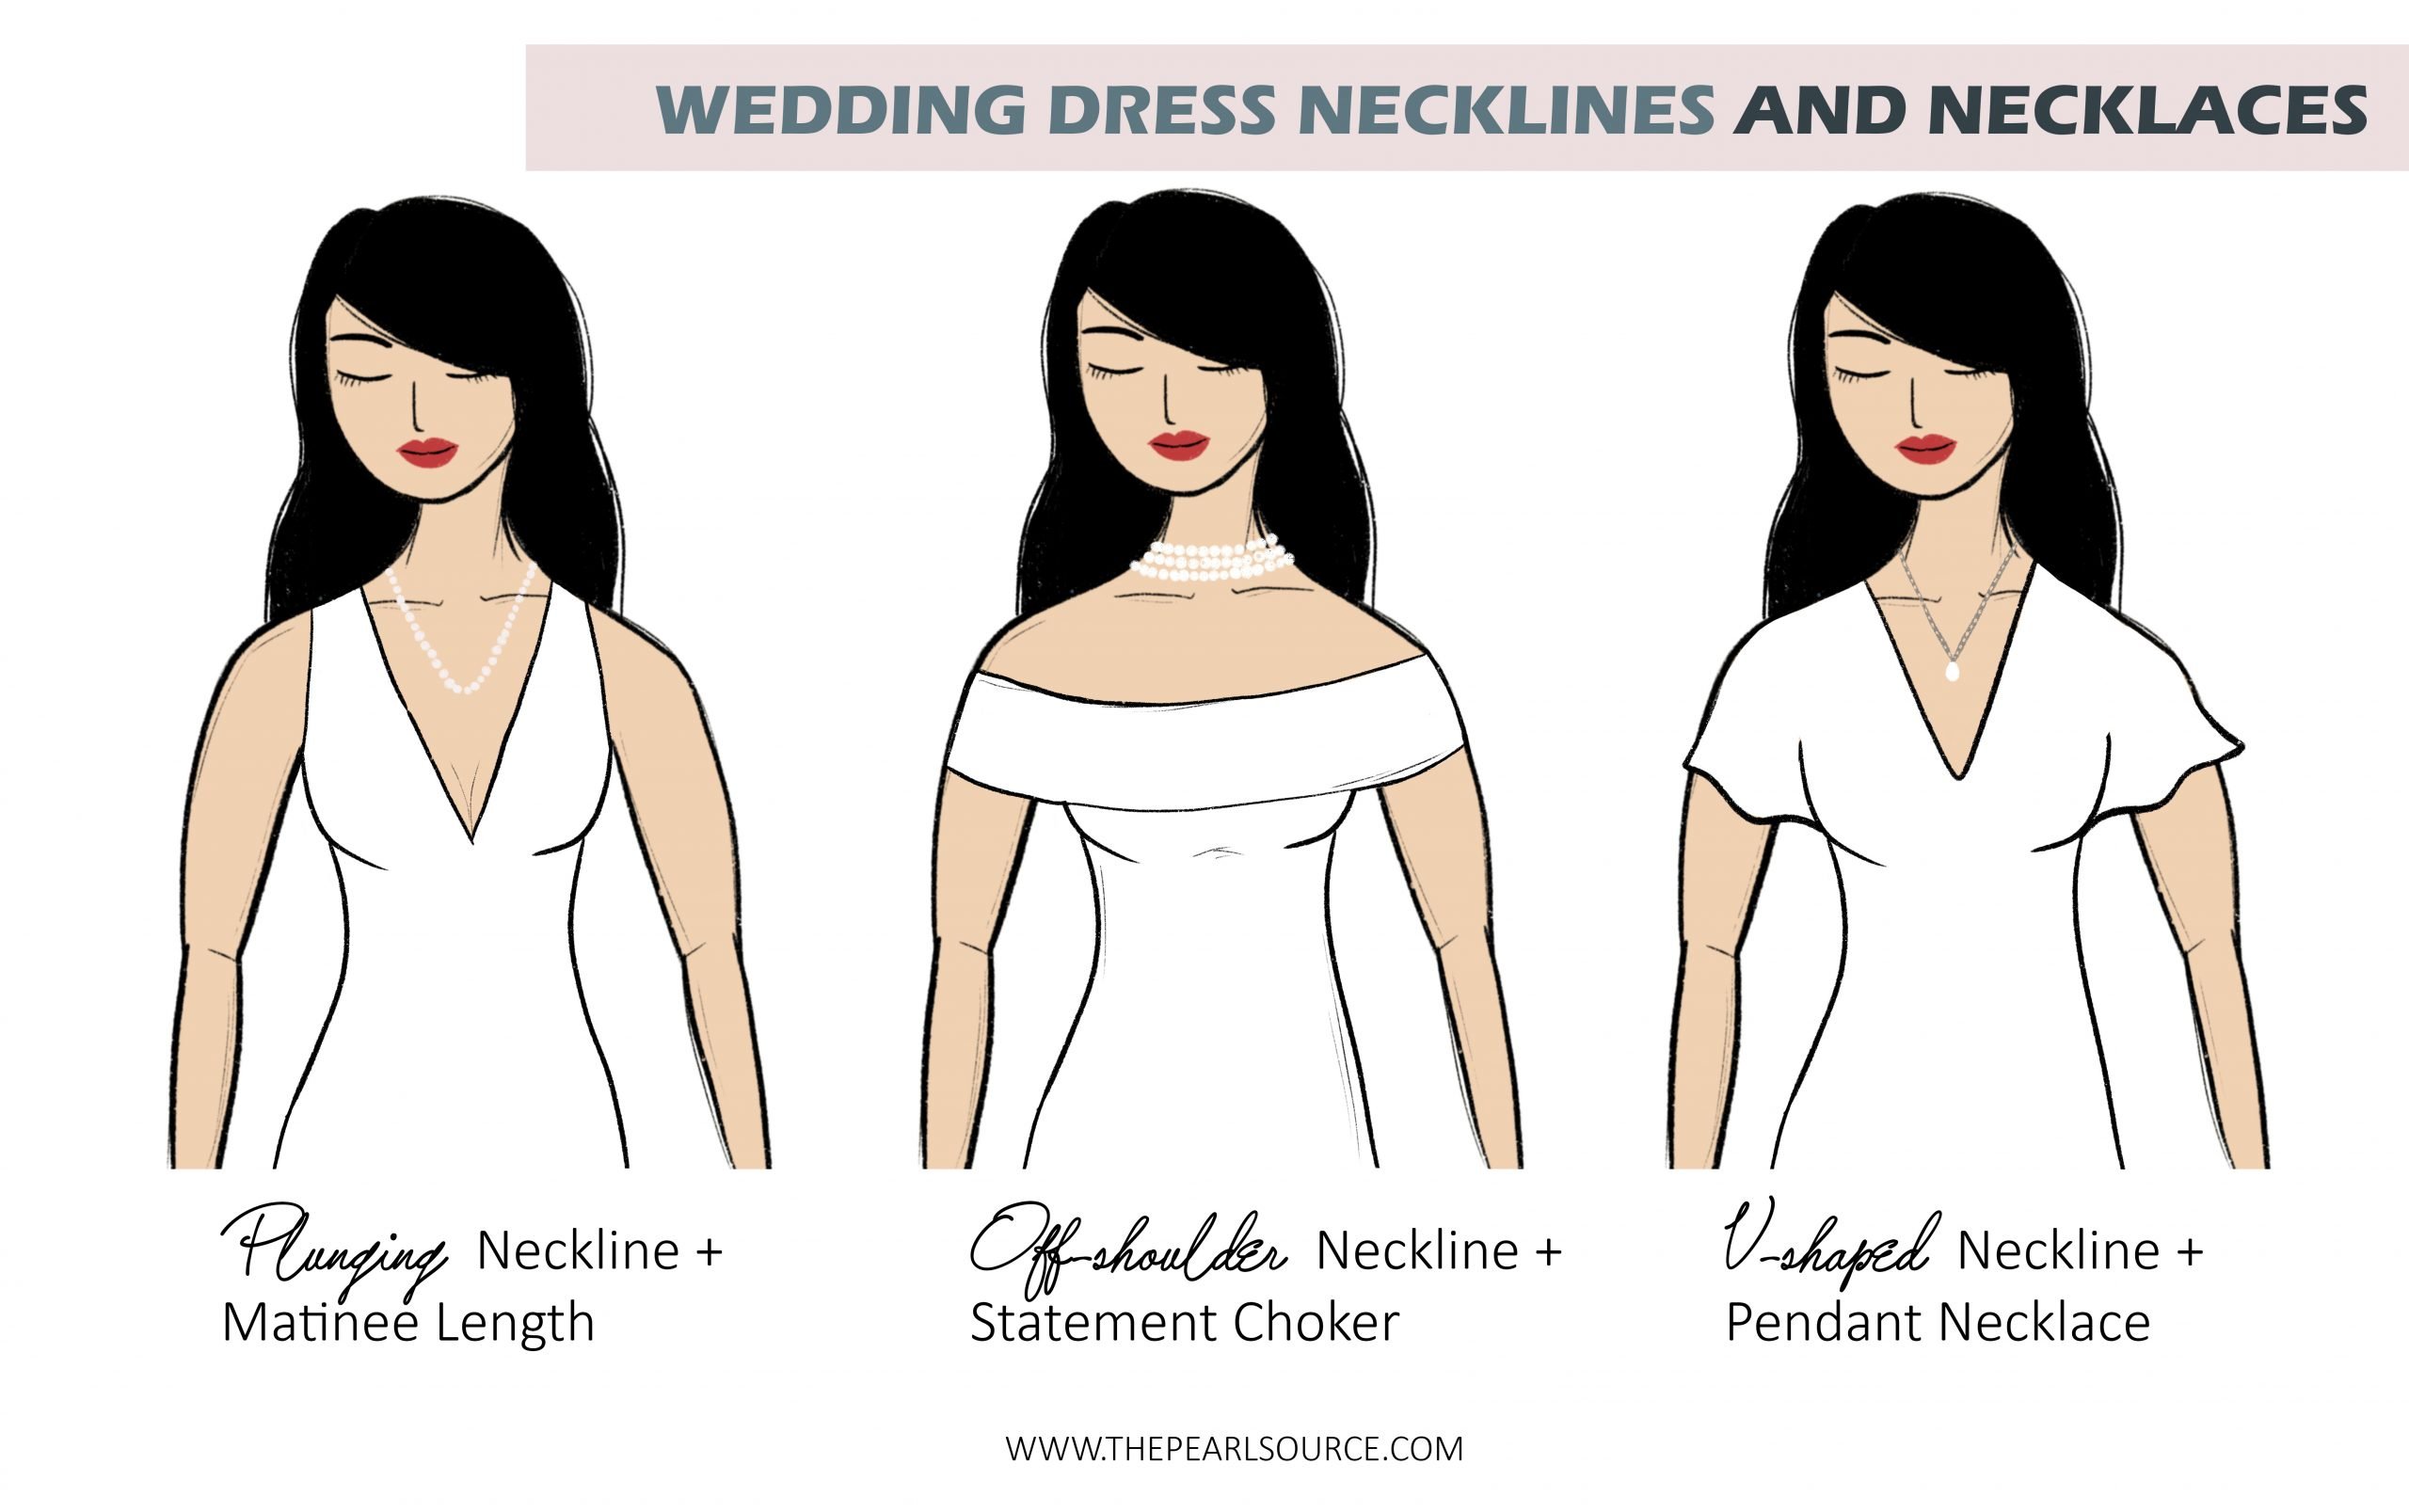 Necklaces and Neckline – WICKED WONDERS